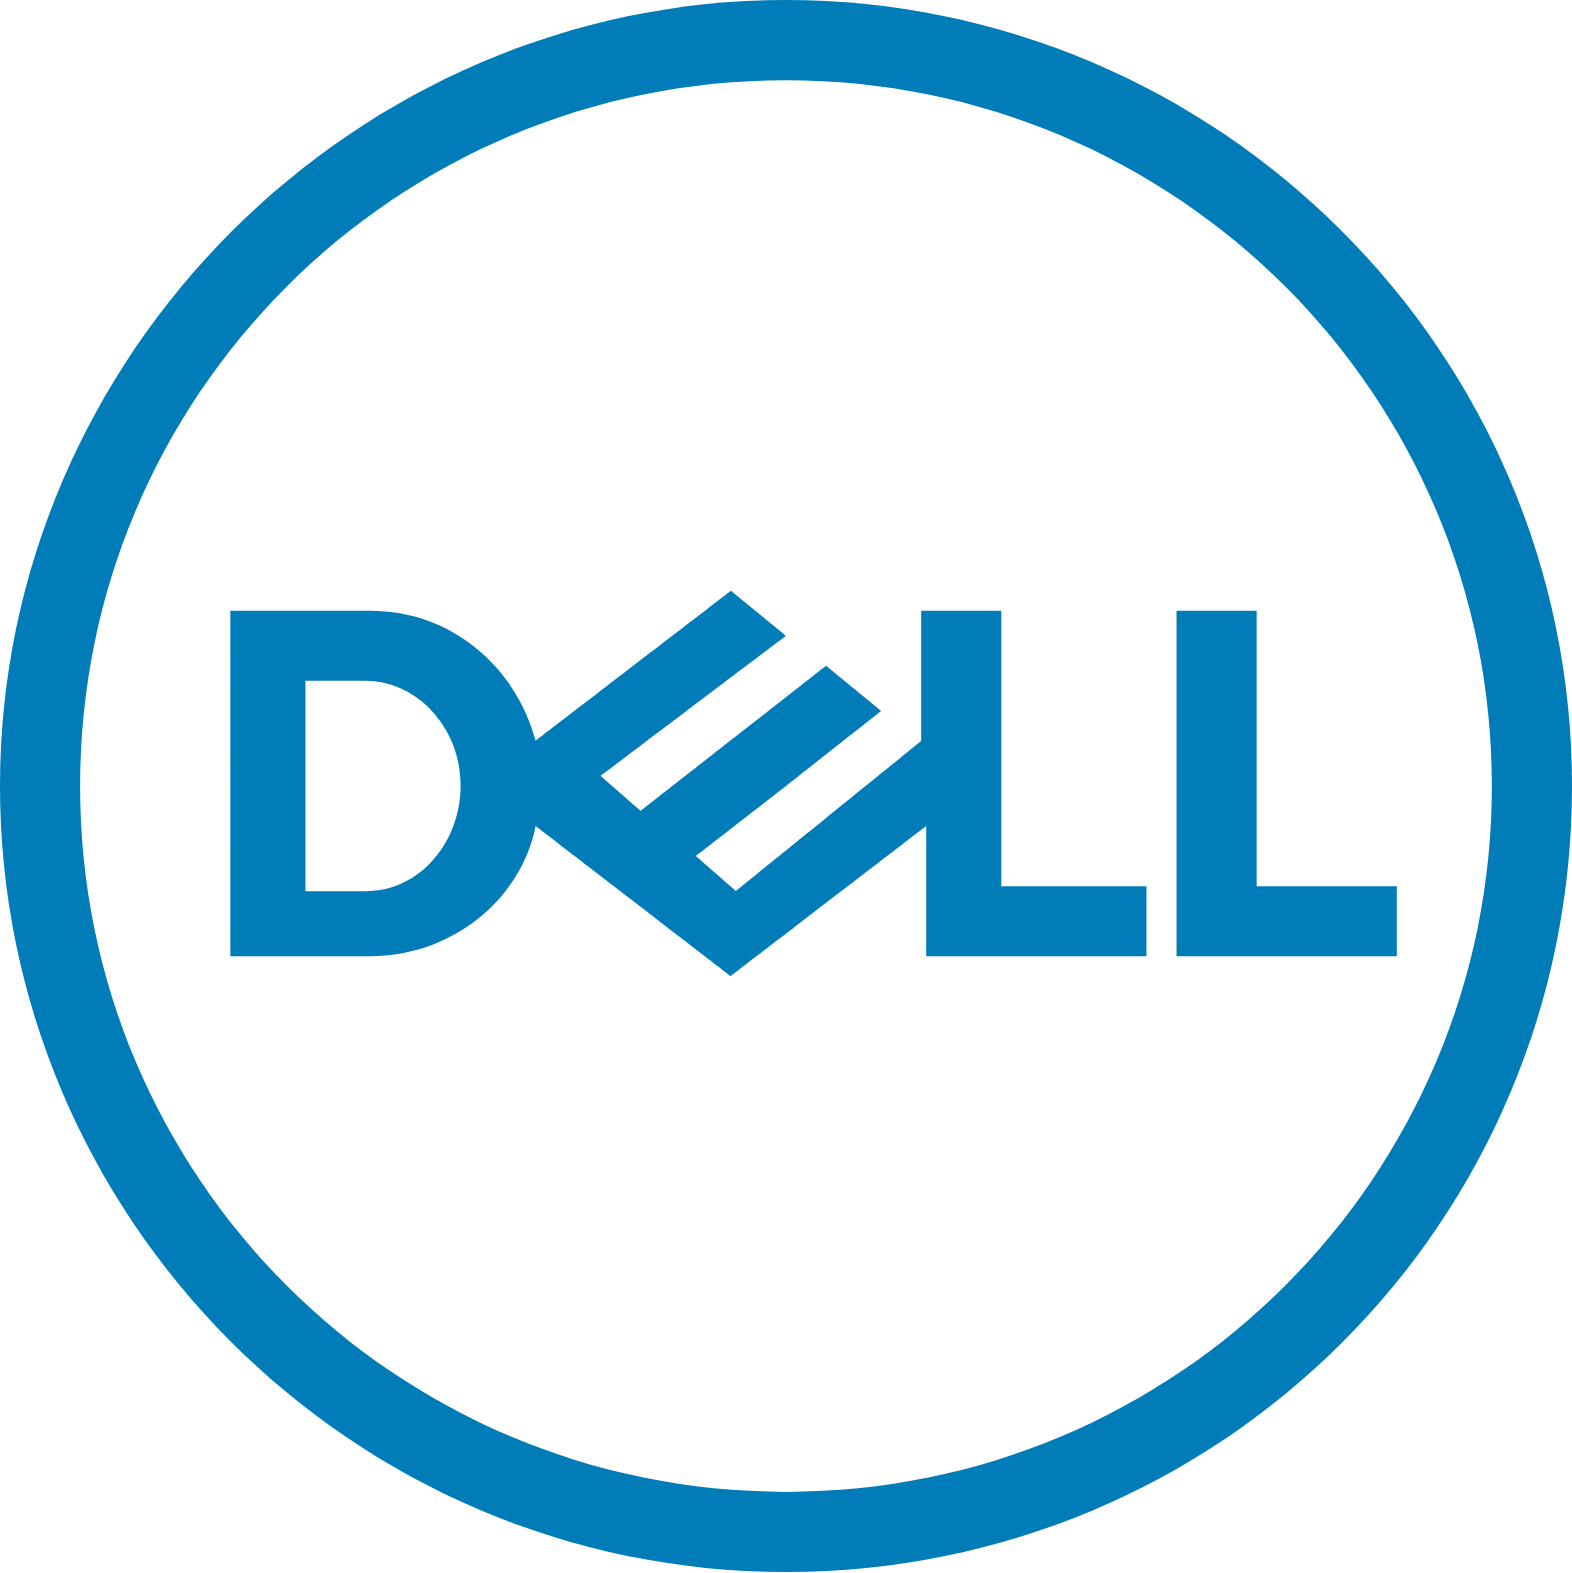 Dell logo in transparent PNG and vectorized SVG formats